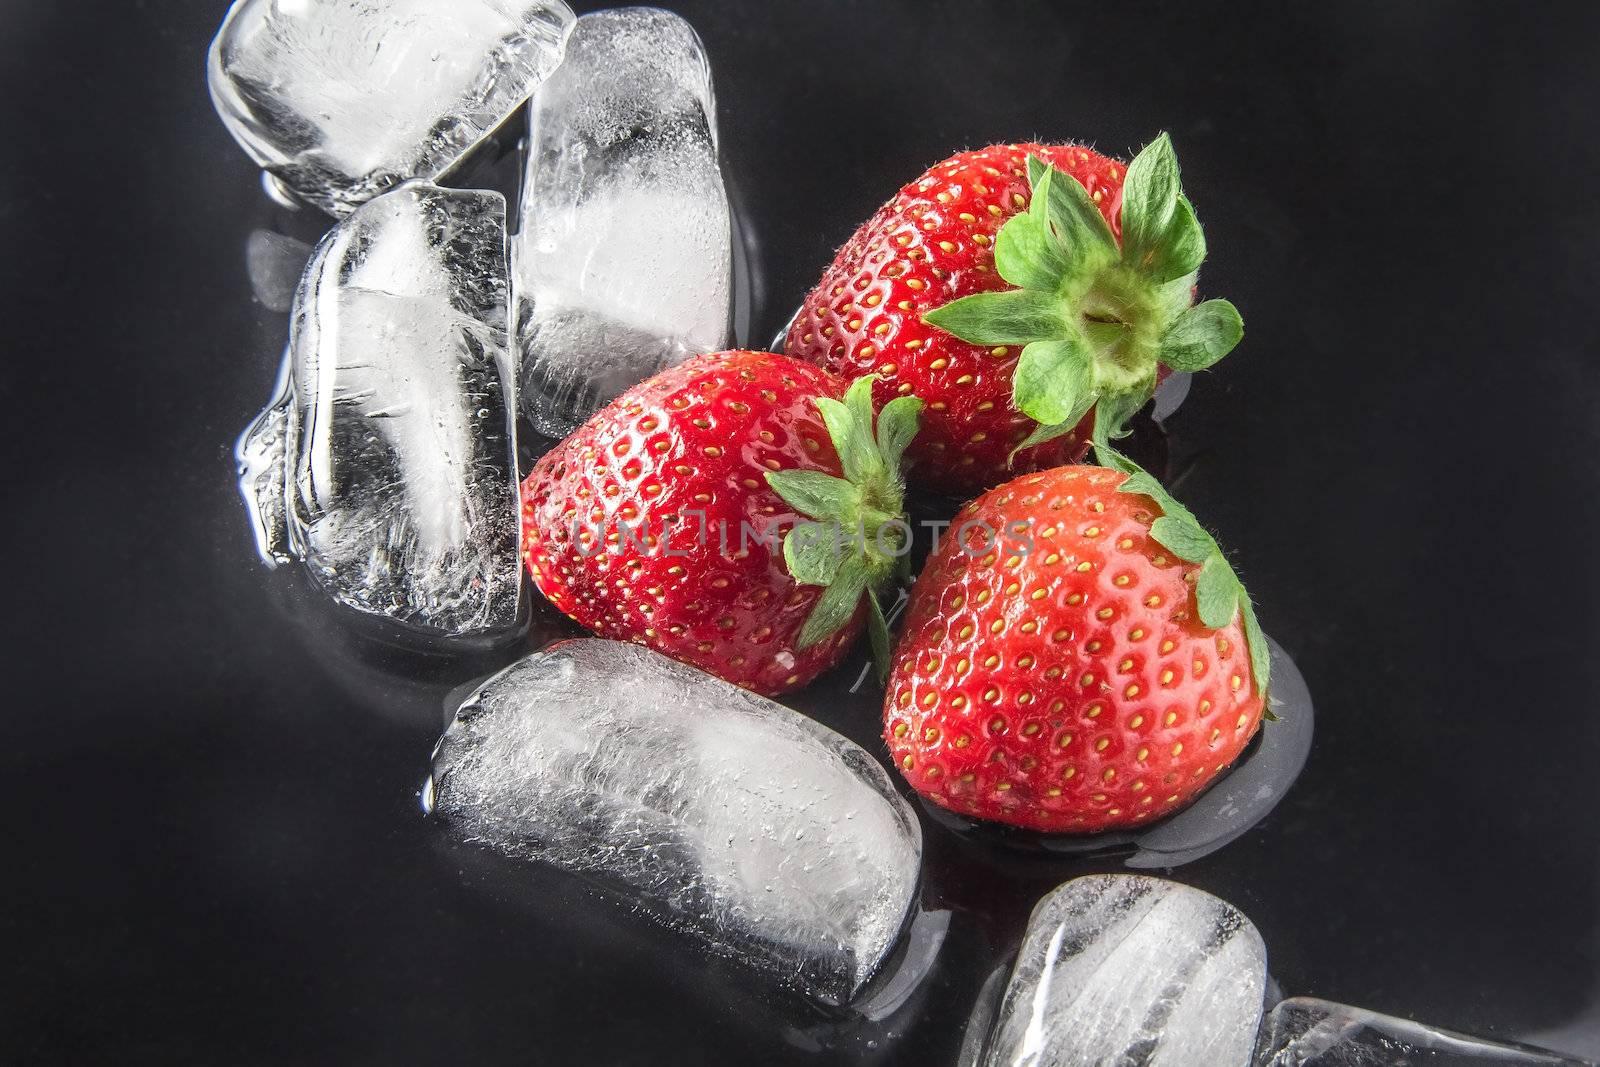 Strawberries with ice by dynamicfoto